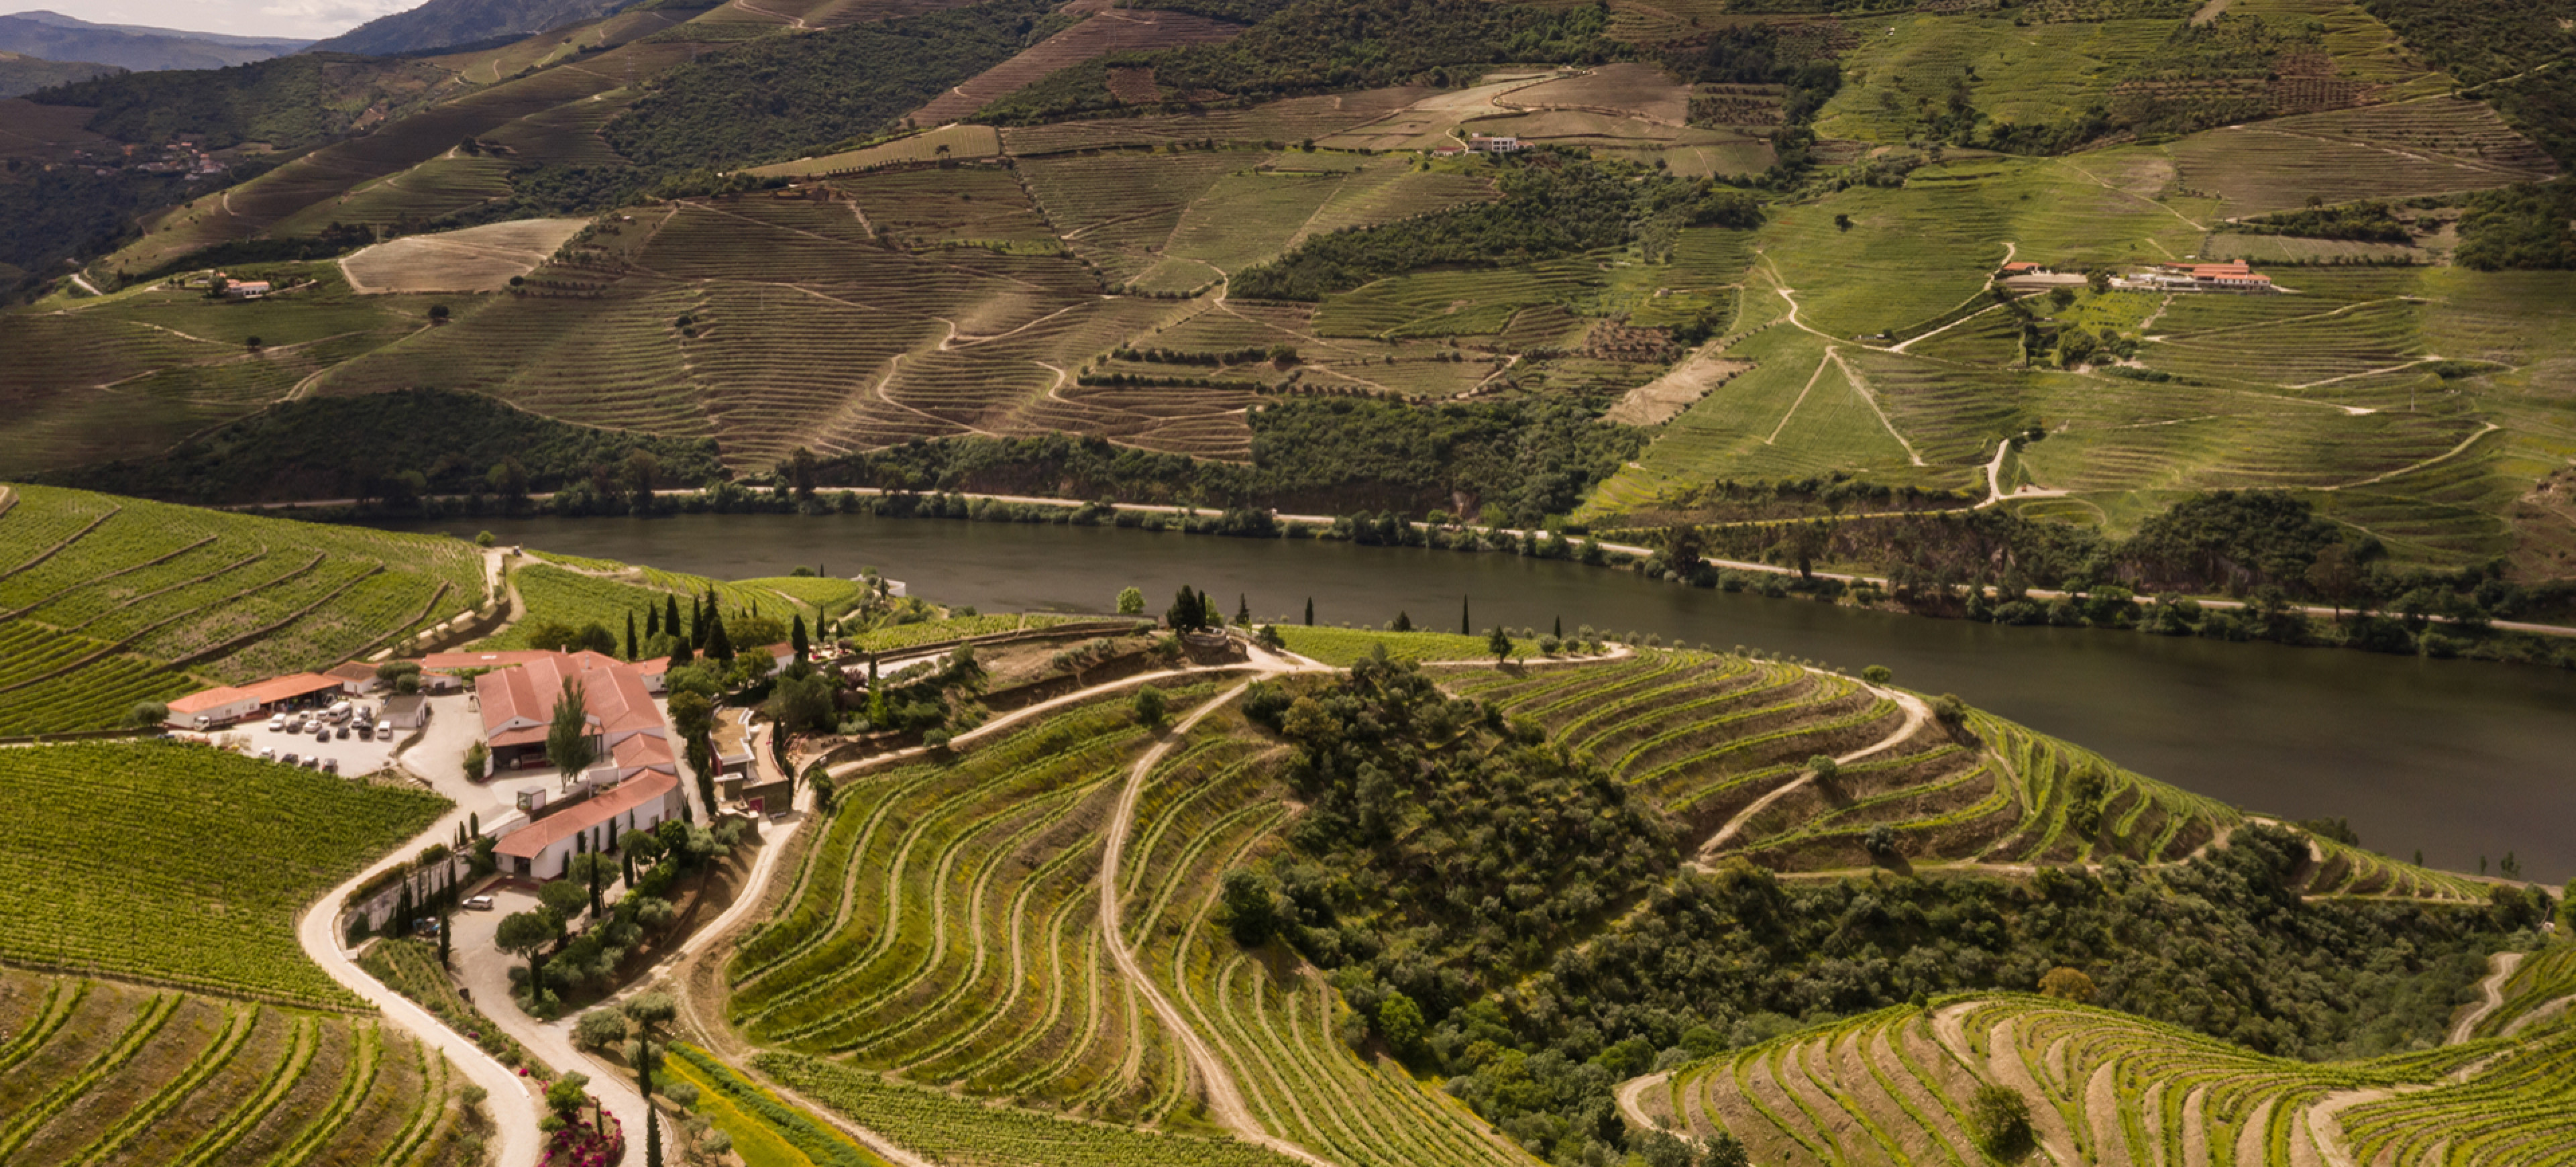 Douro - the Wine, the Hillsides, and the River